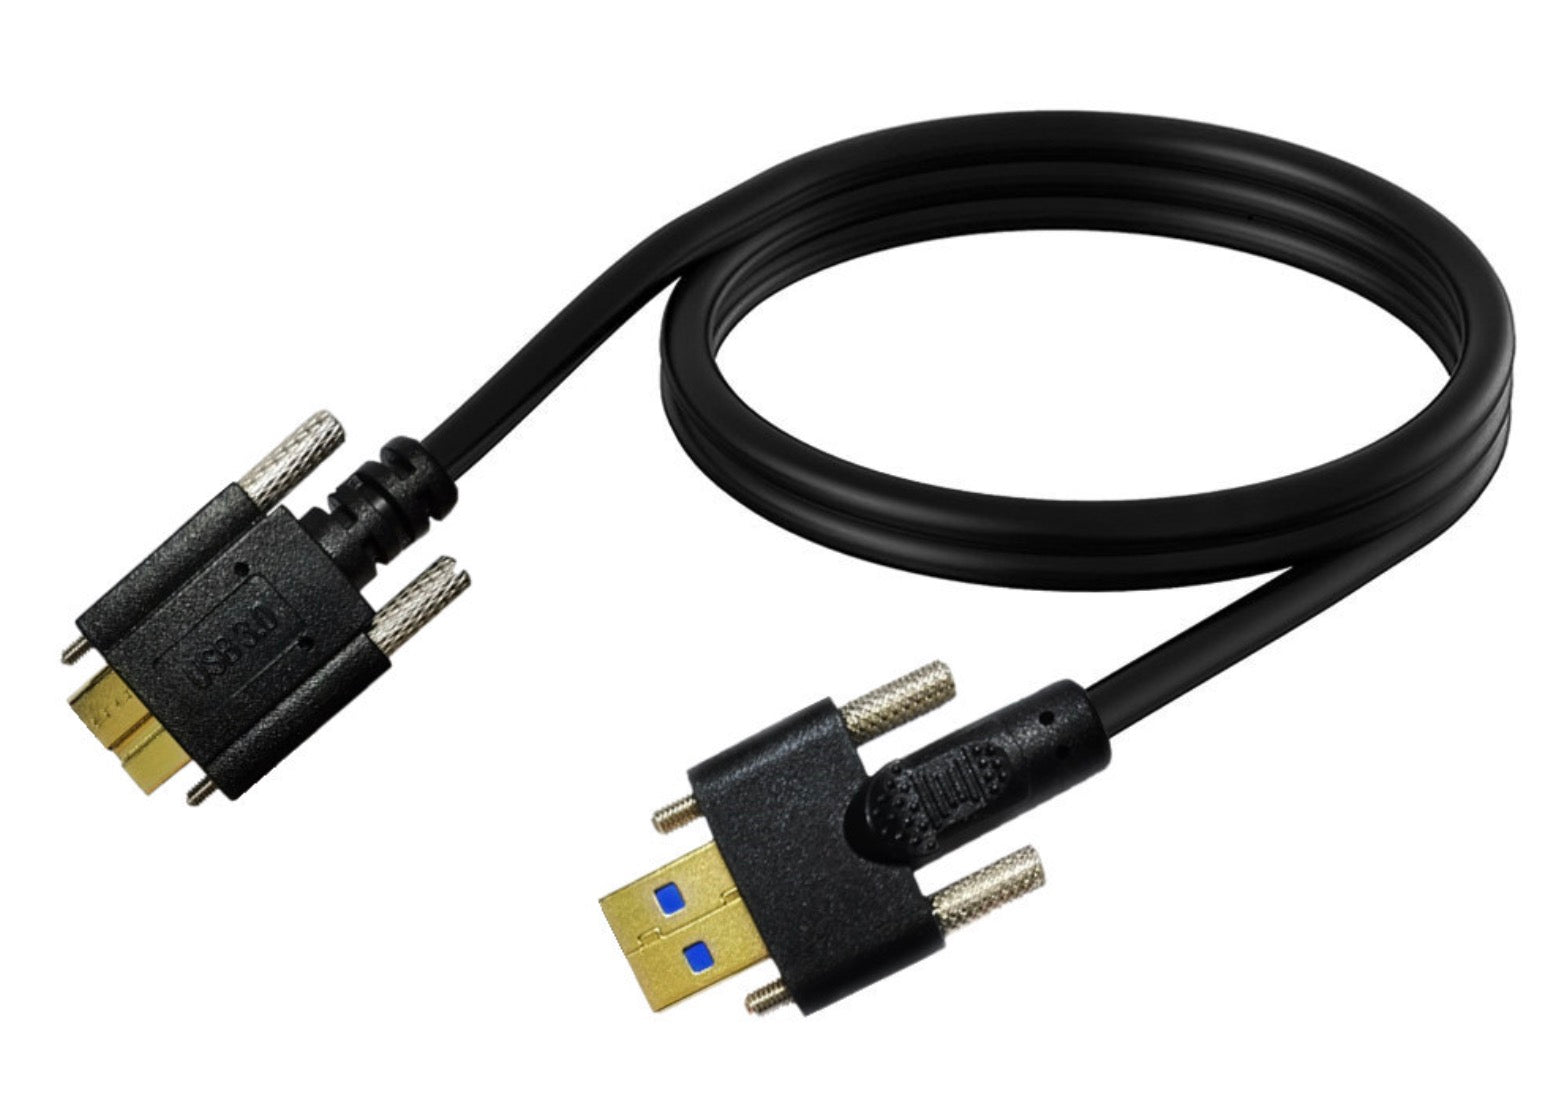 USB 3.0 A Male to Micro-B Male with Dual M3 Screw Locking Cable